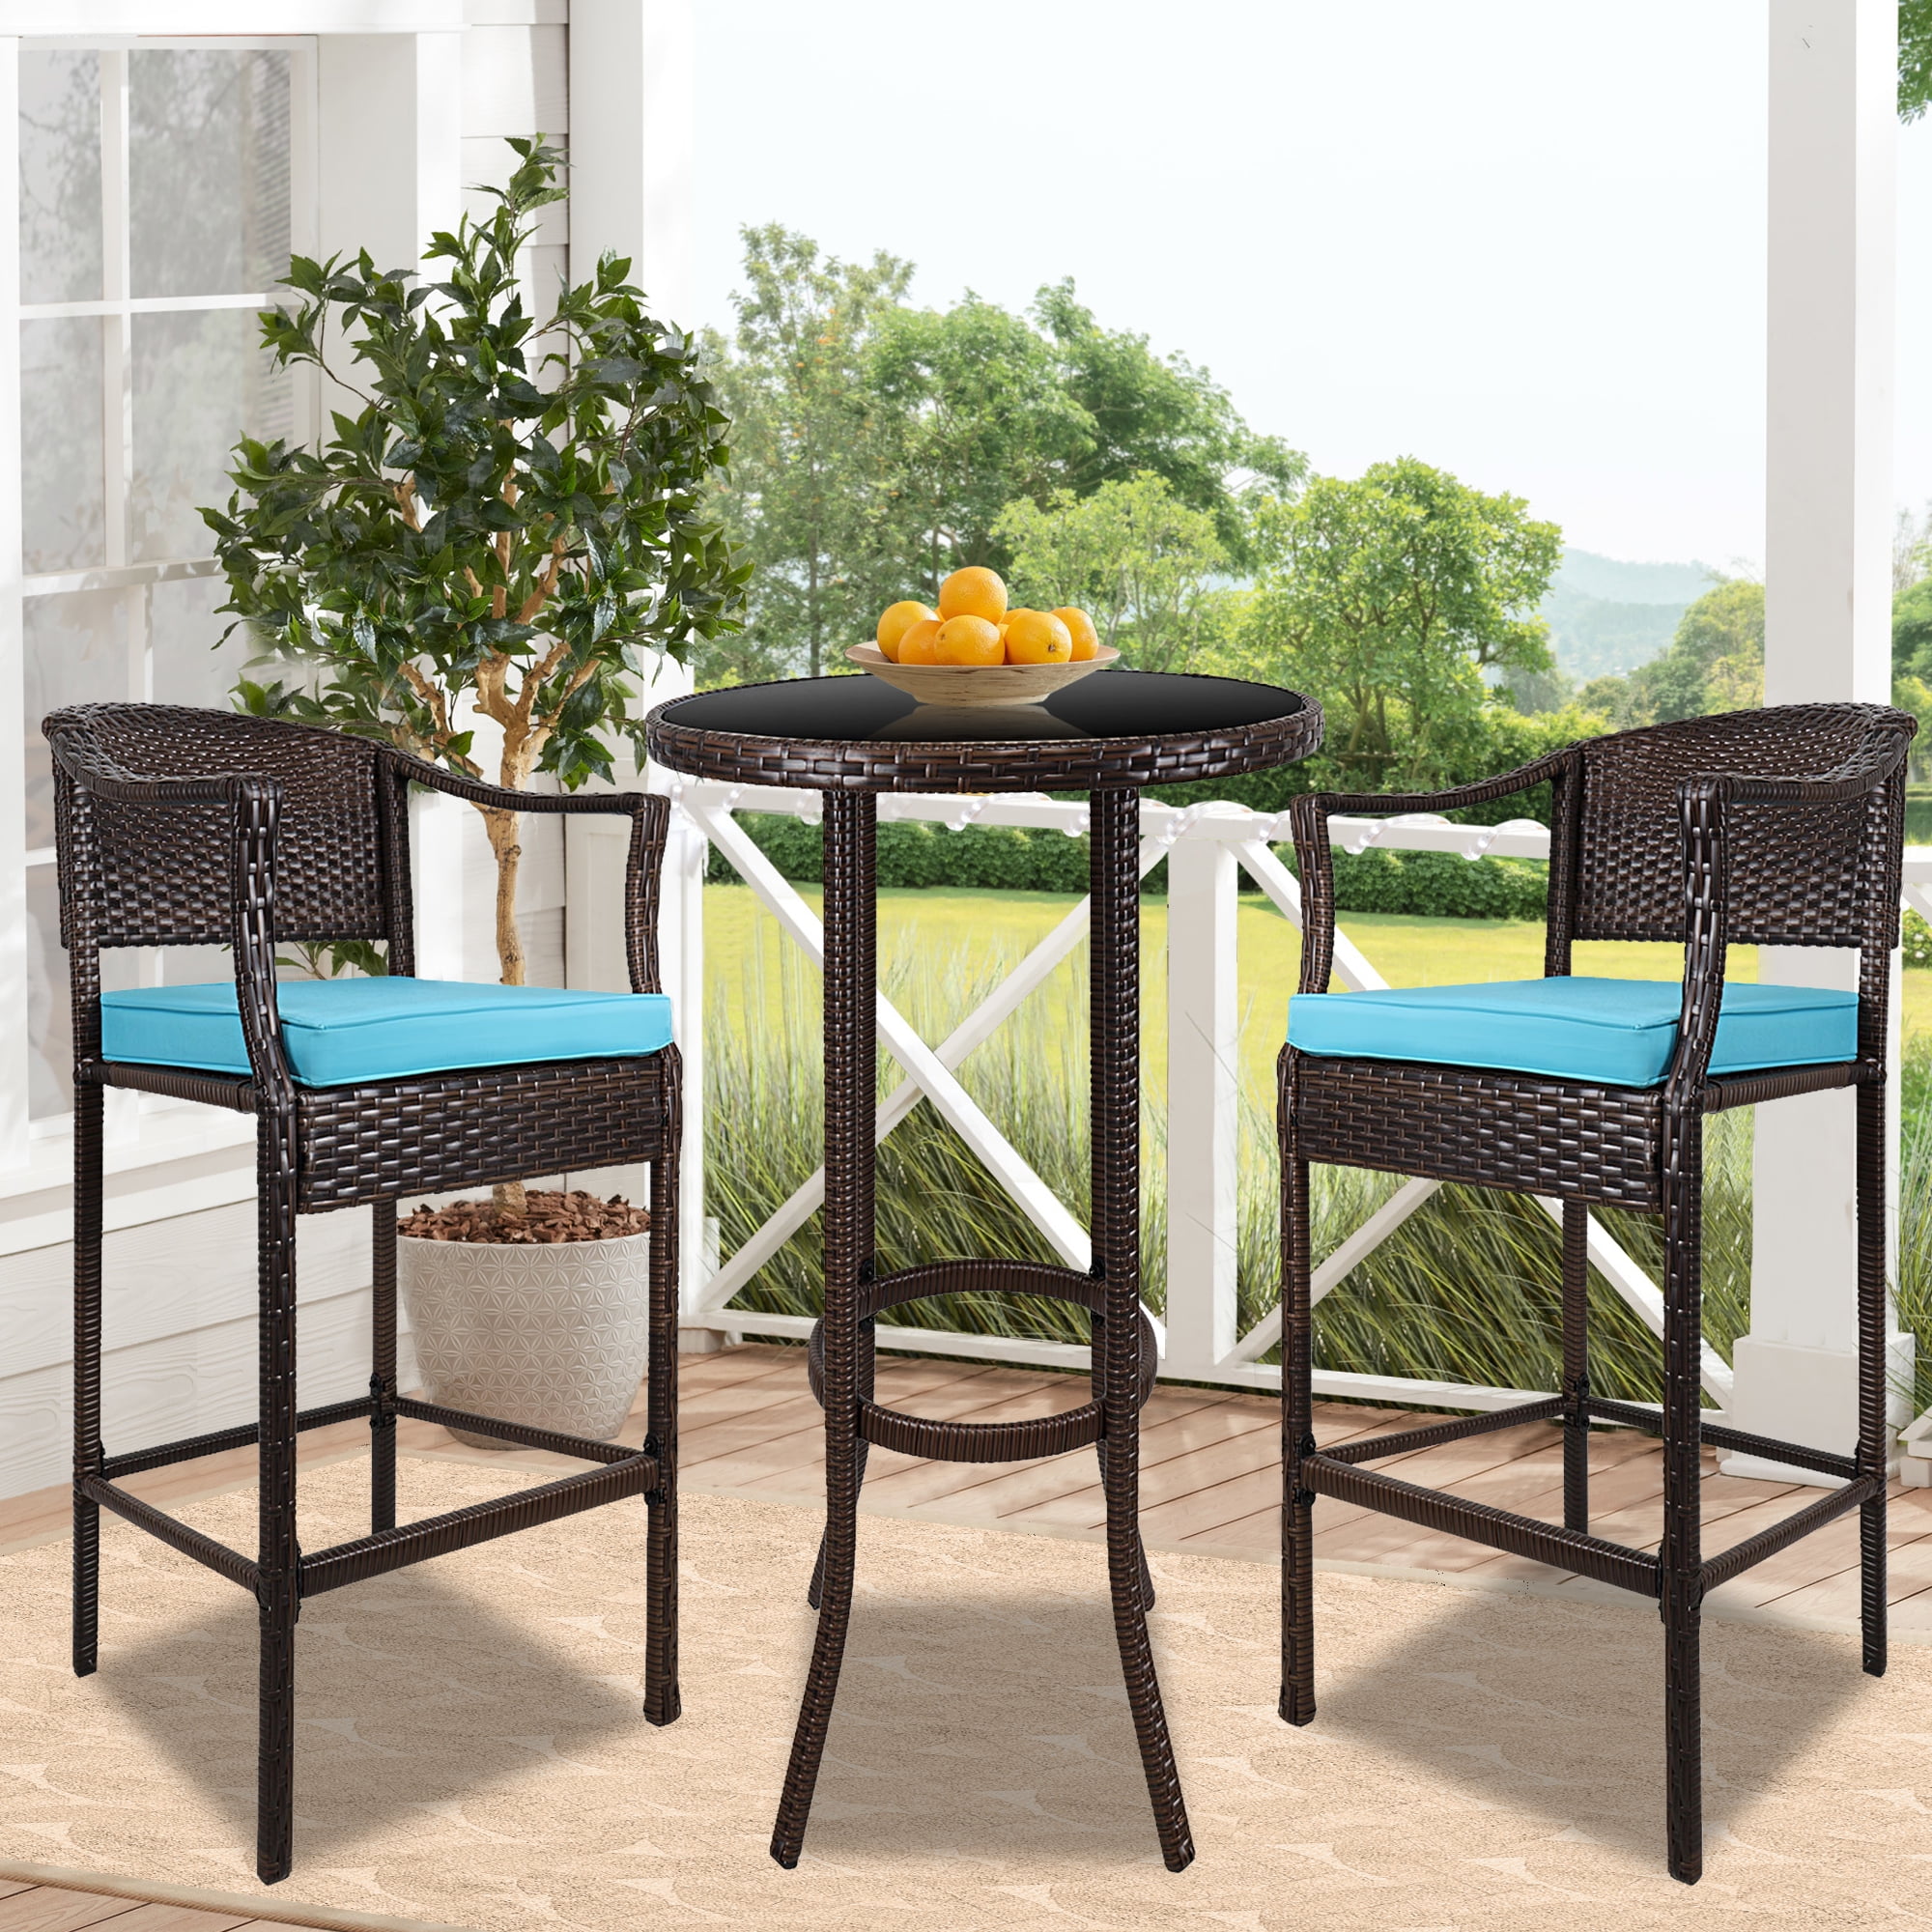 Chair Wicker Bar Height Bistro, Outdoor Counter Height Bistro Table And Chairs